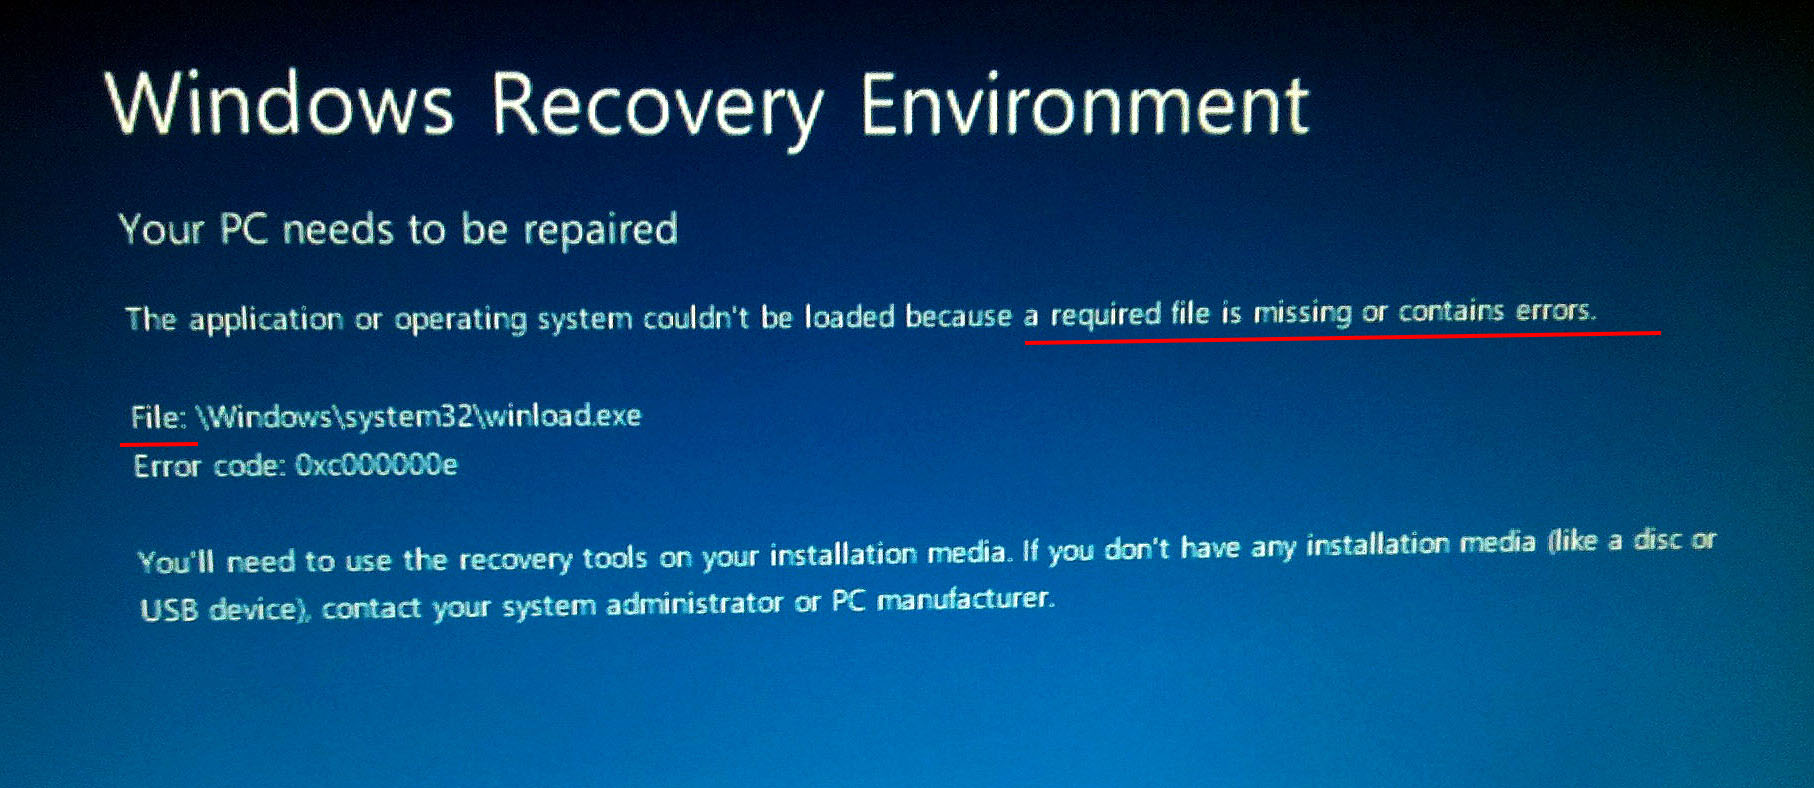 Windows recovered. Восстановление Windows. Среда восстановления виндовс. Recovery виндовс. Windows Recovery environment.